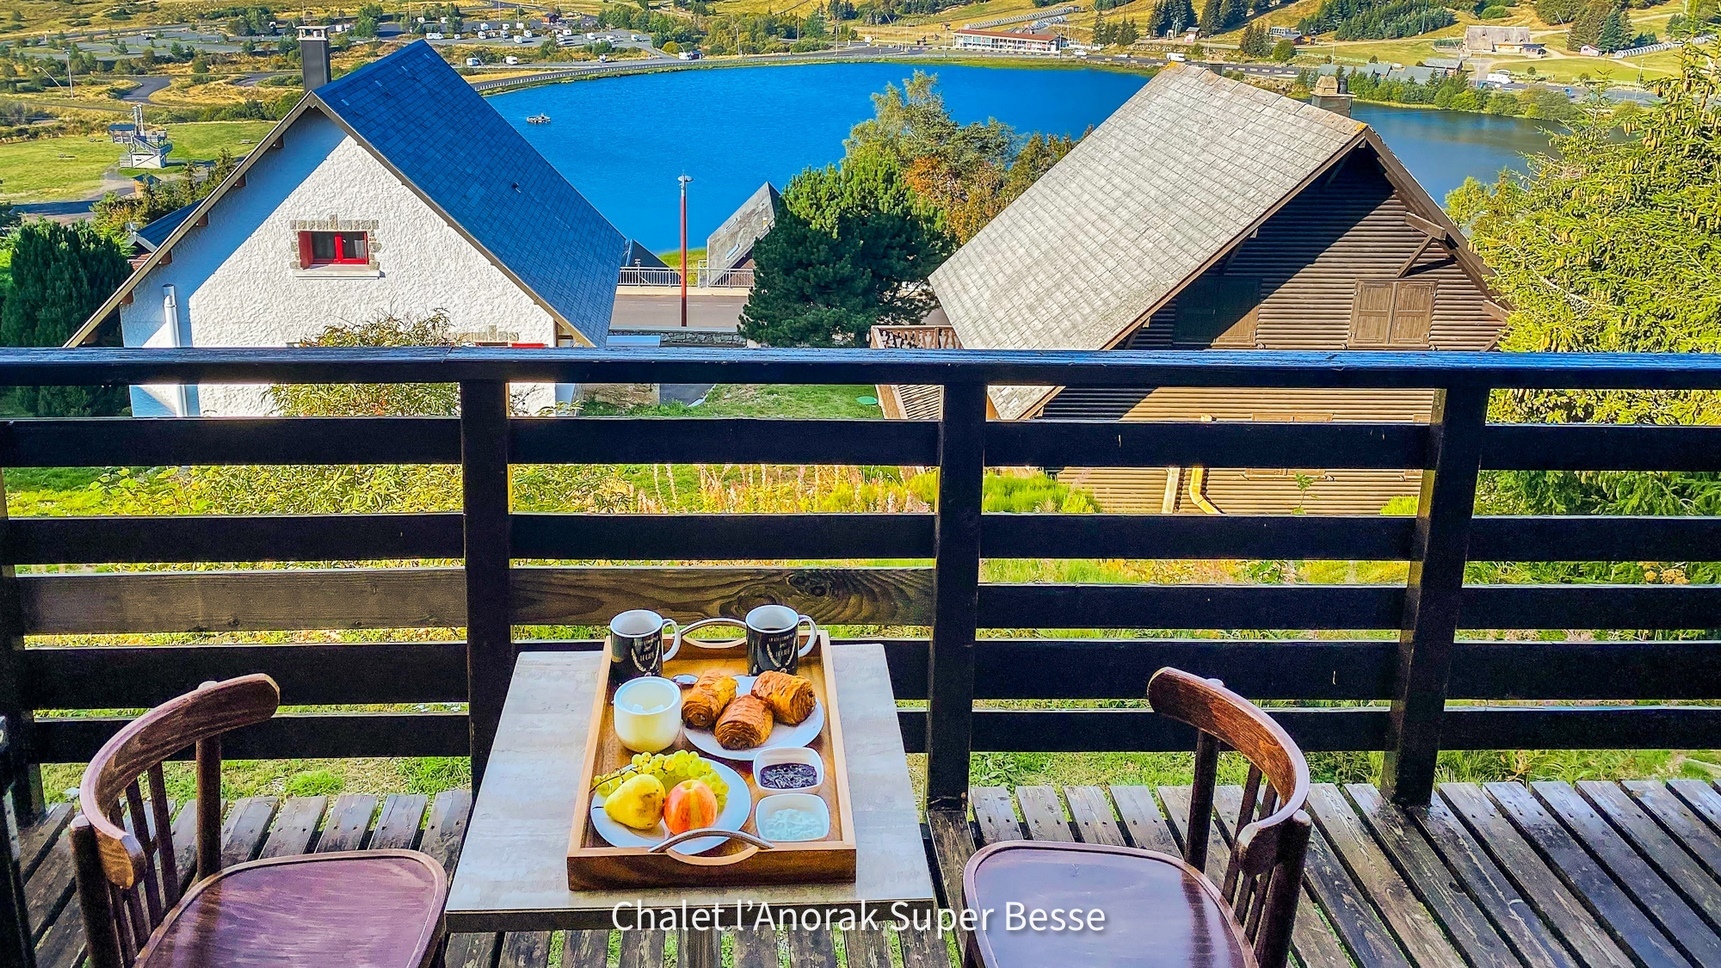 Chalet l'Anorak in Super Besse, the balcony and its view of Lac des Hermines